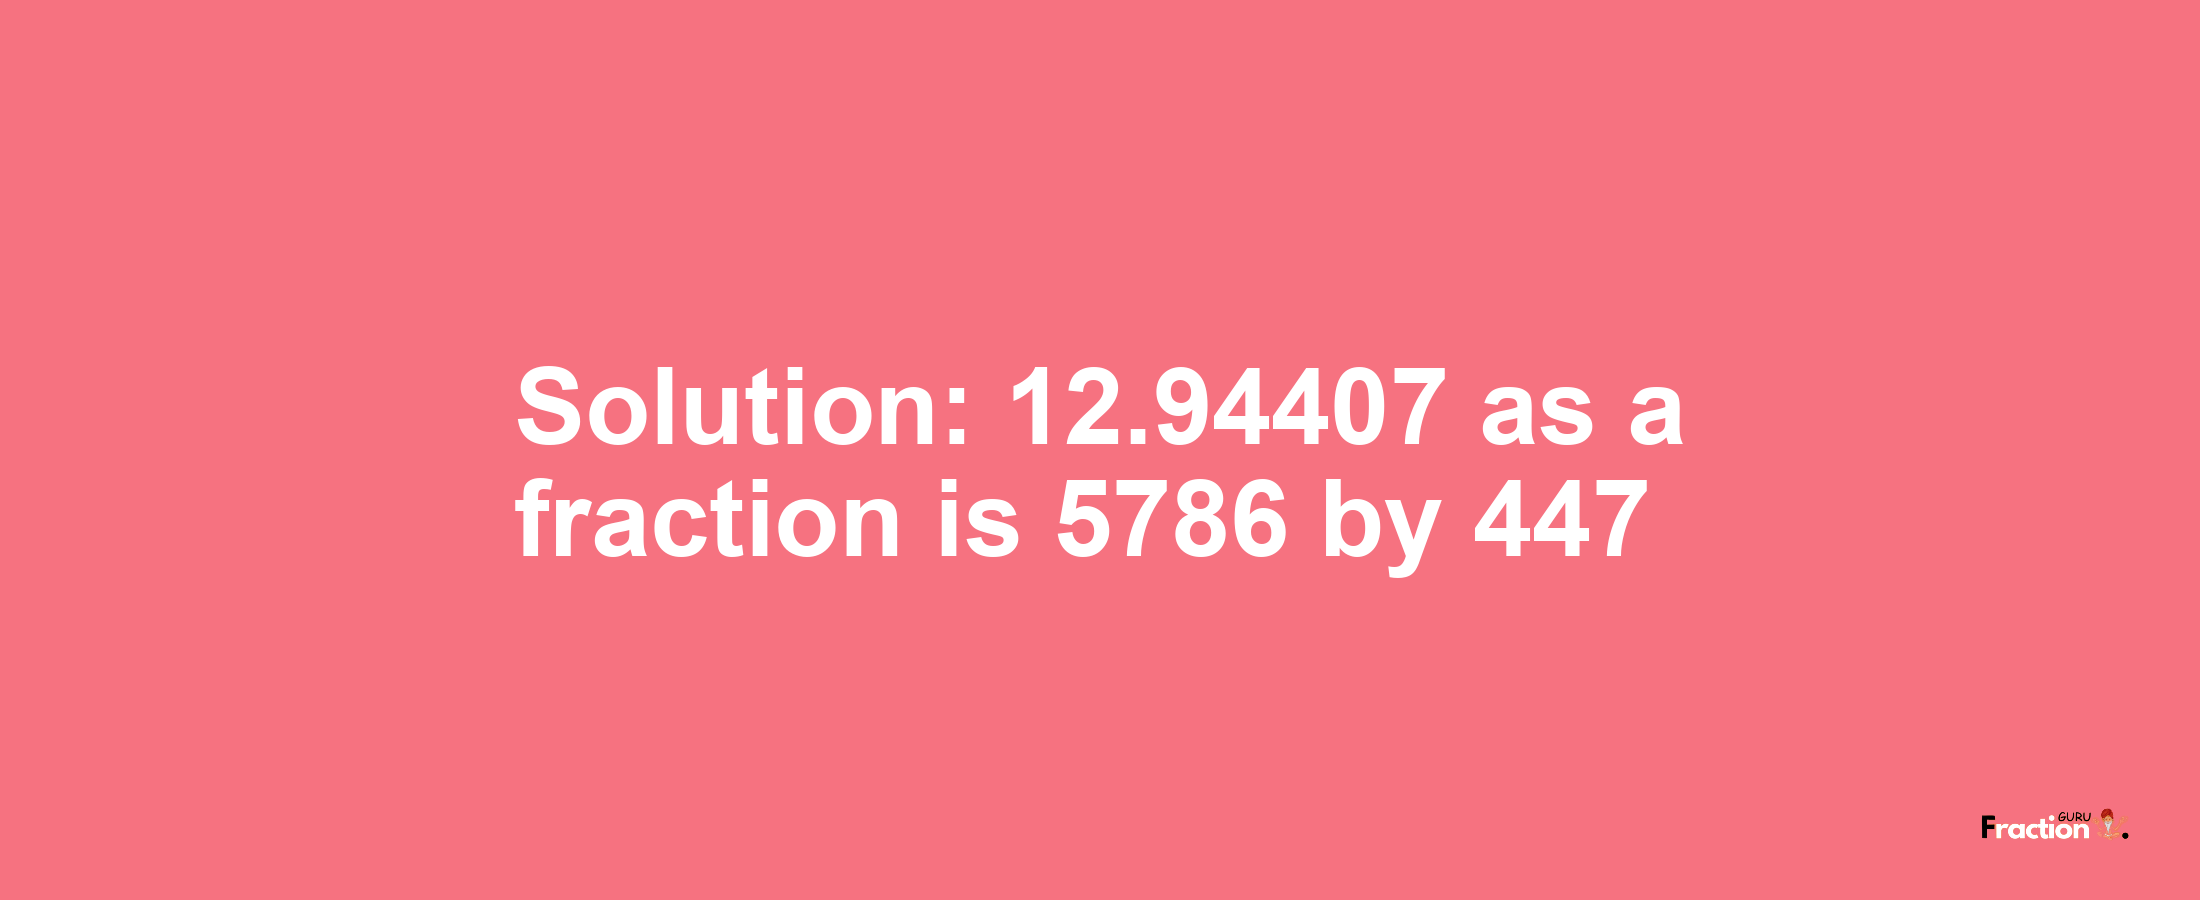 Solution:12.94407 as a fraction is 5786/447